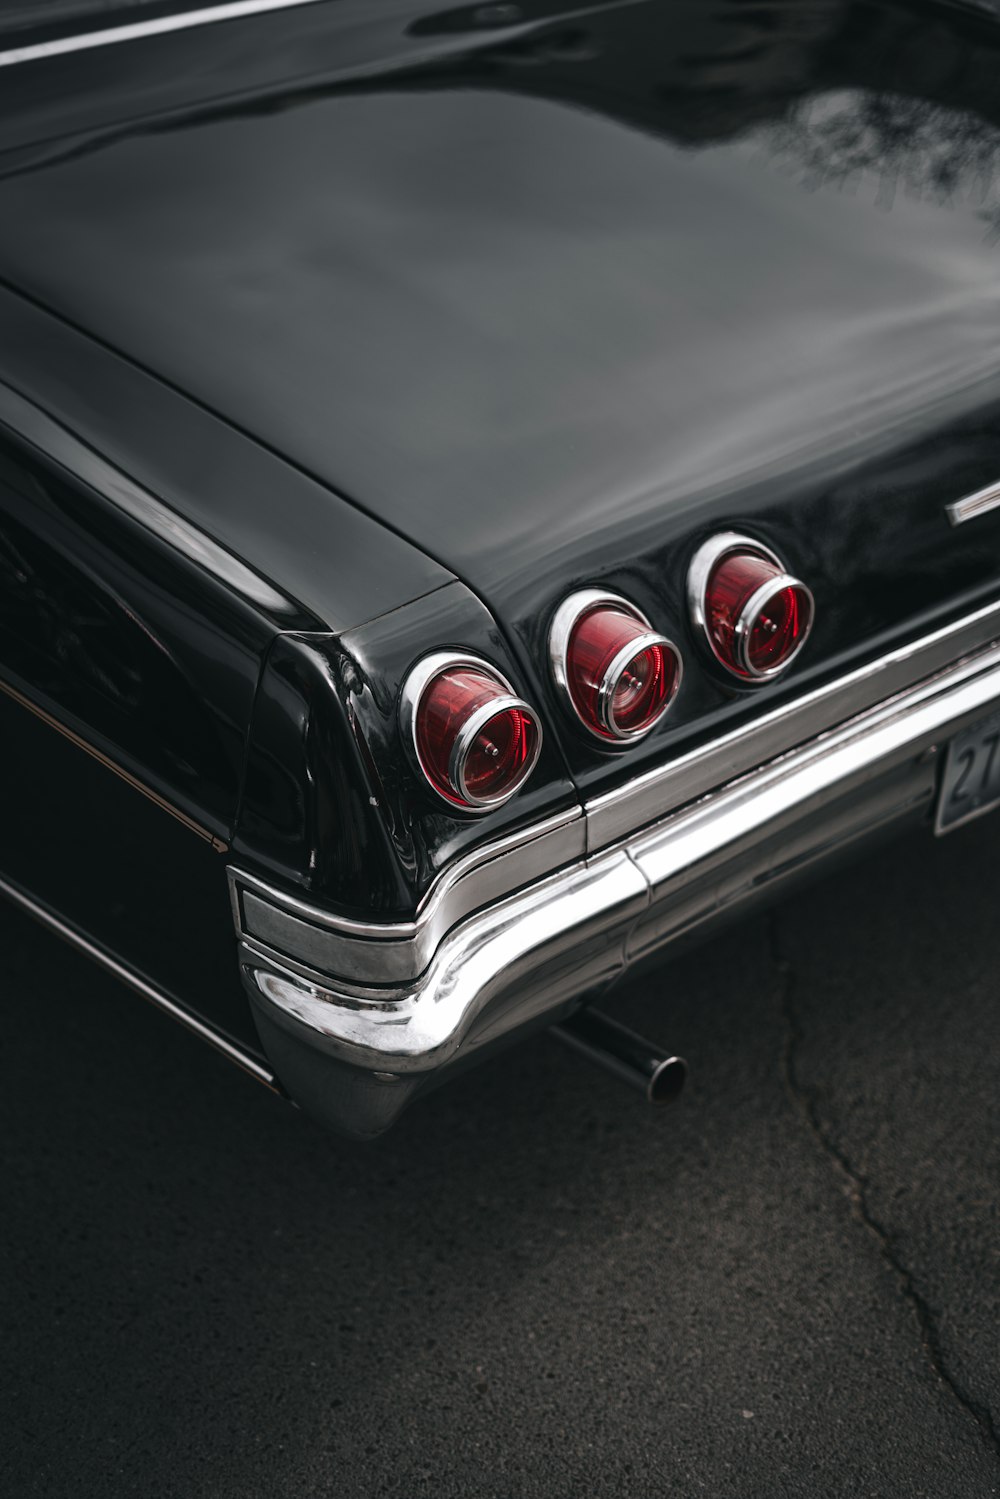 a close up of the tail lights of a classic car